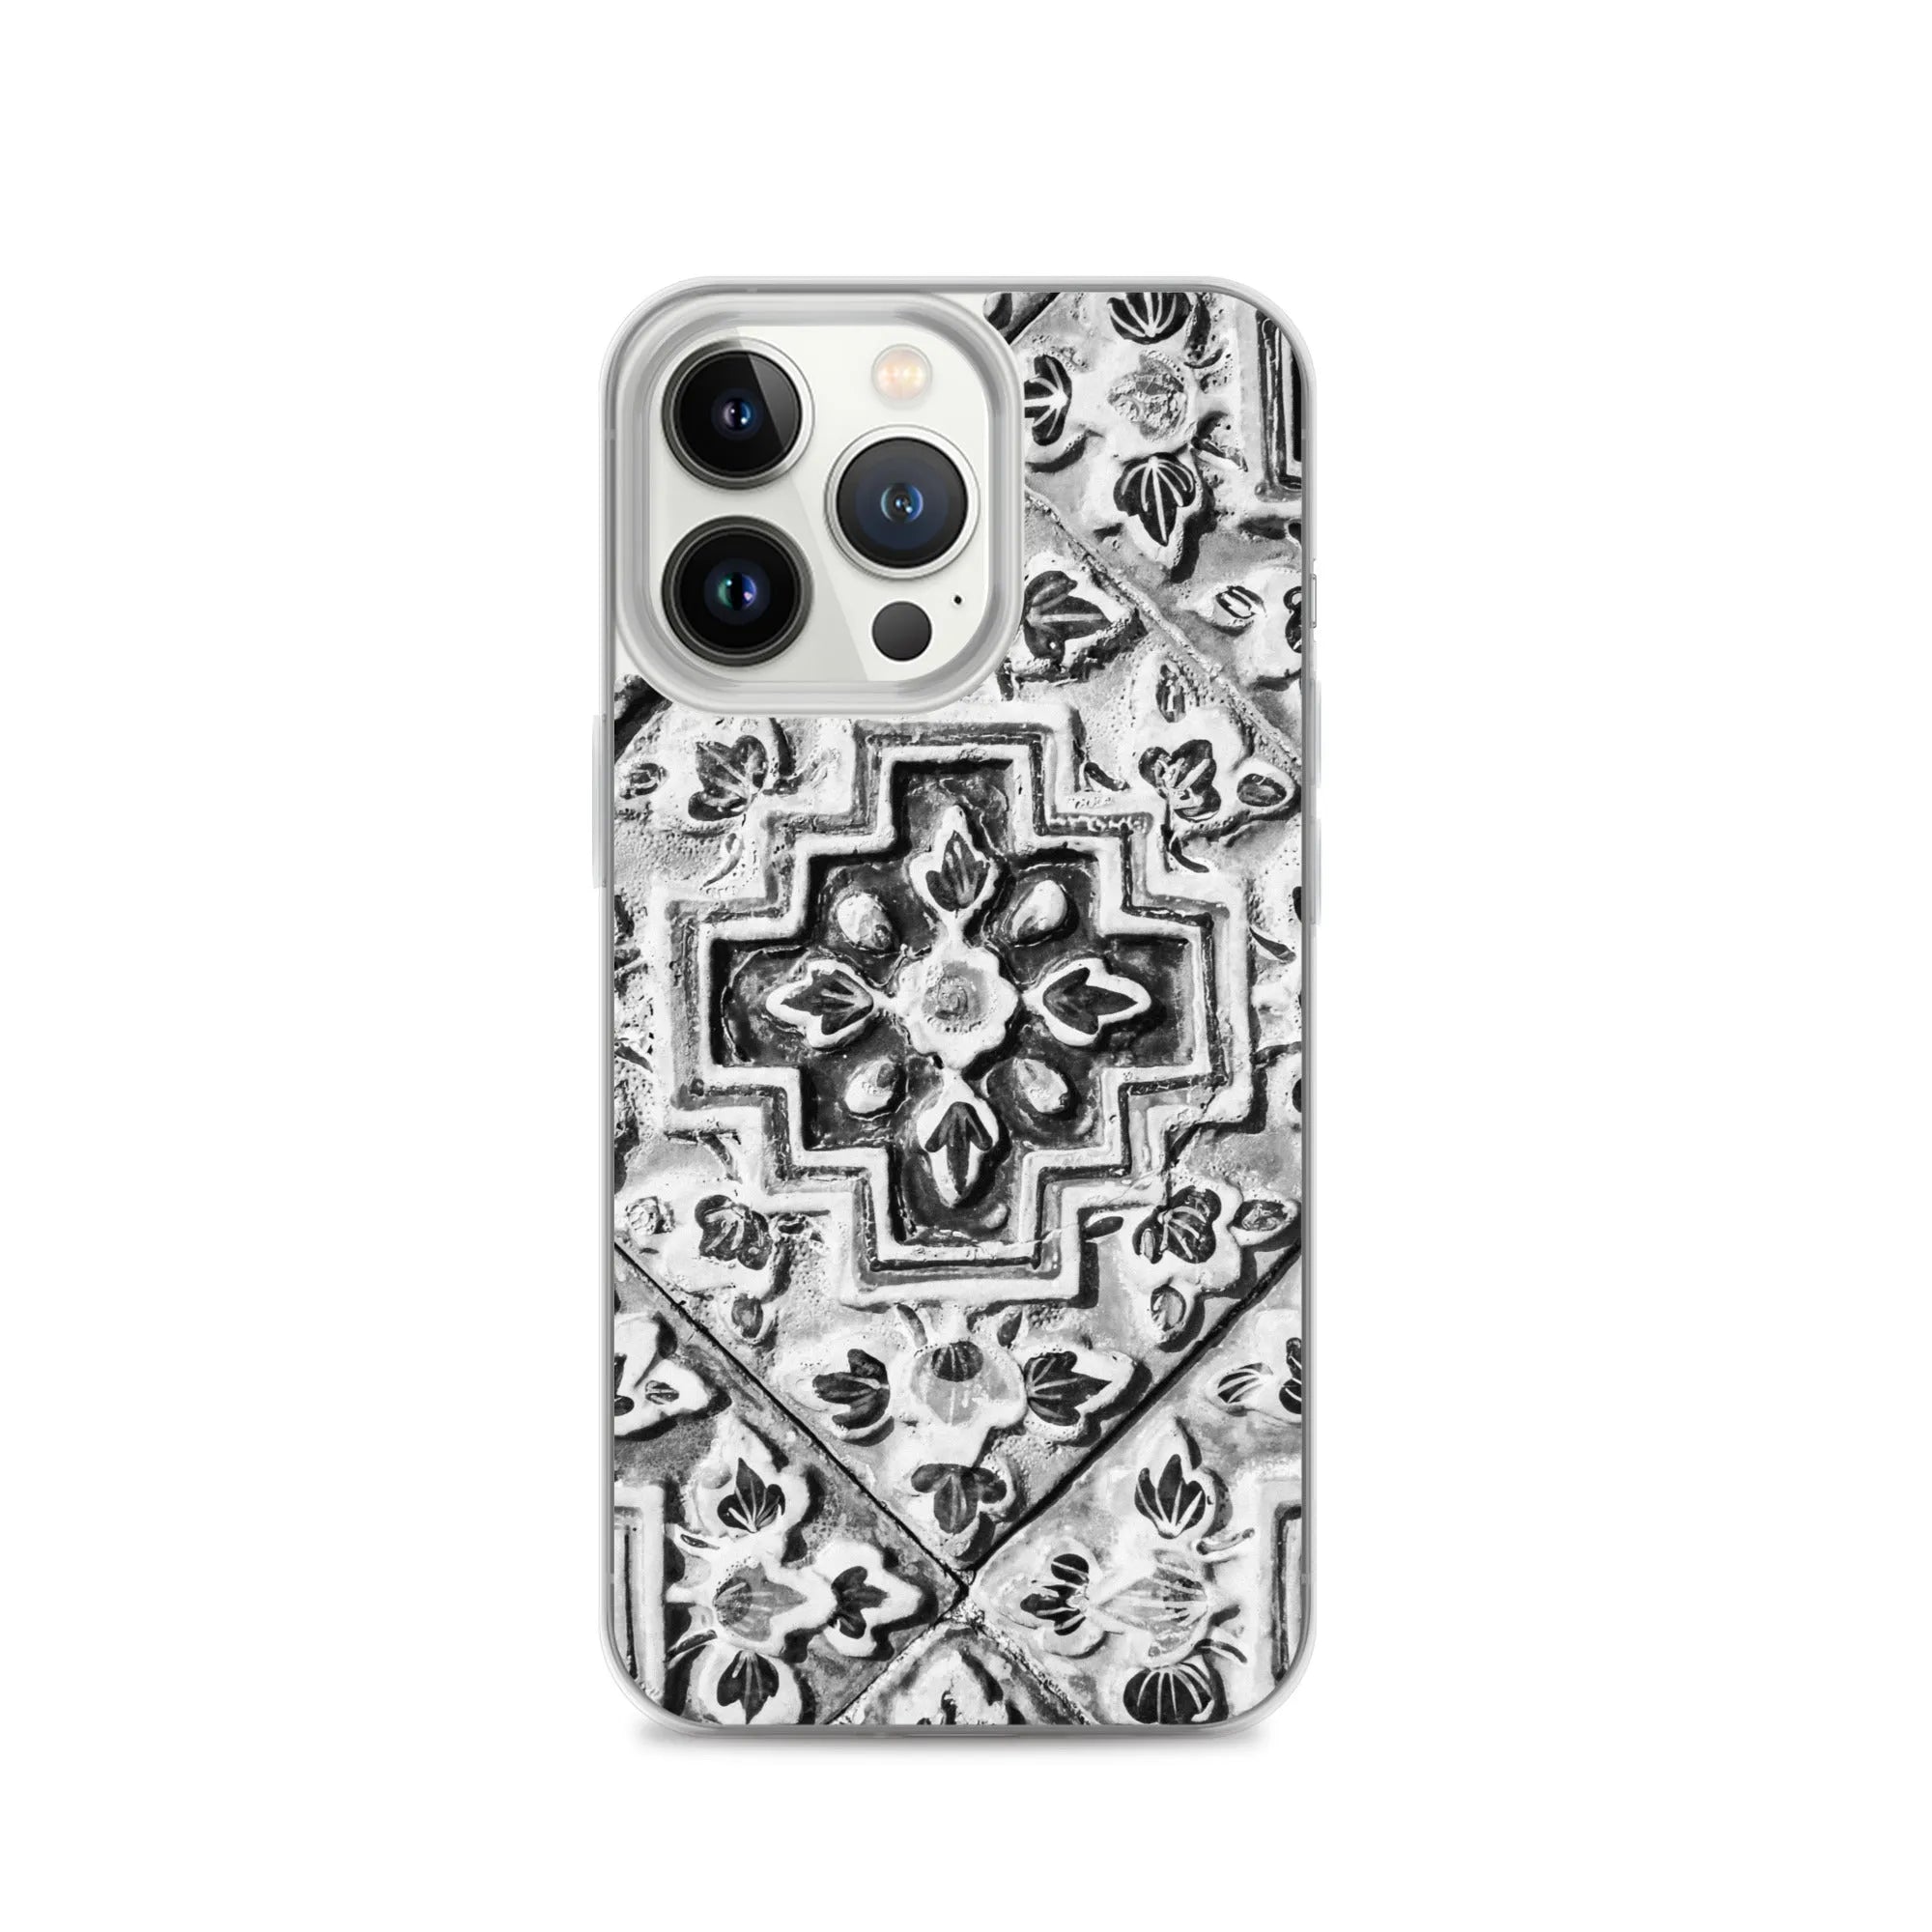 Tactile - Designer Travels Art Iphone Case - Black And White - Iphone 13 Pro - Mobile Phone Cases - Aesthetic Art